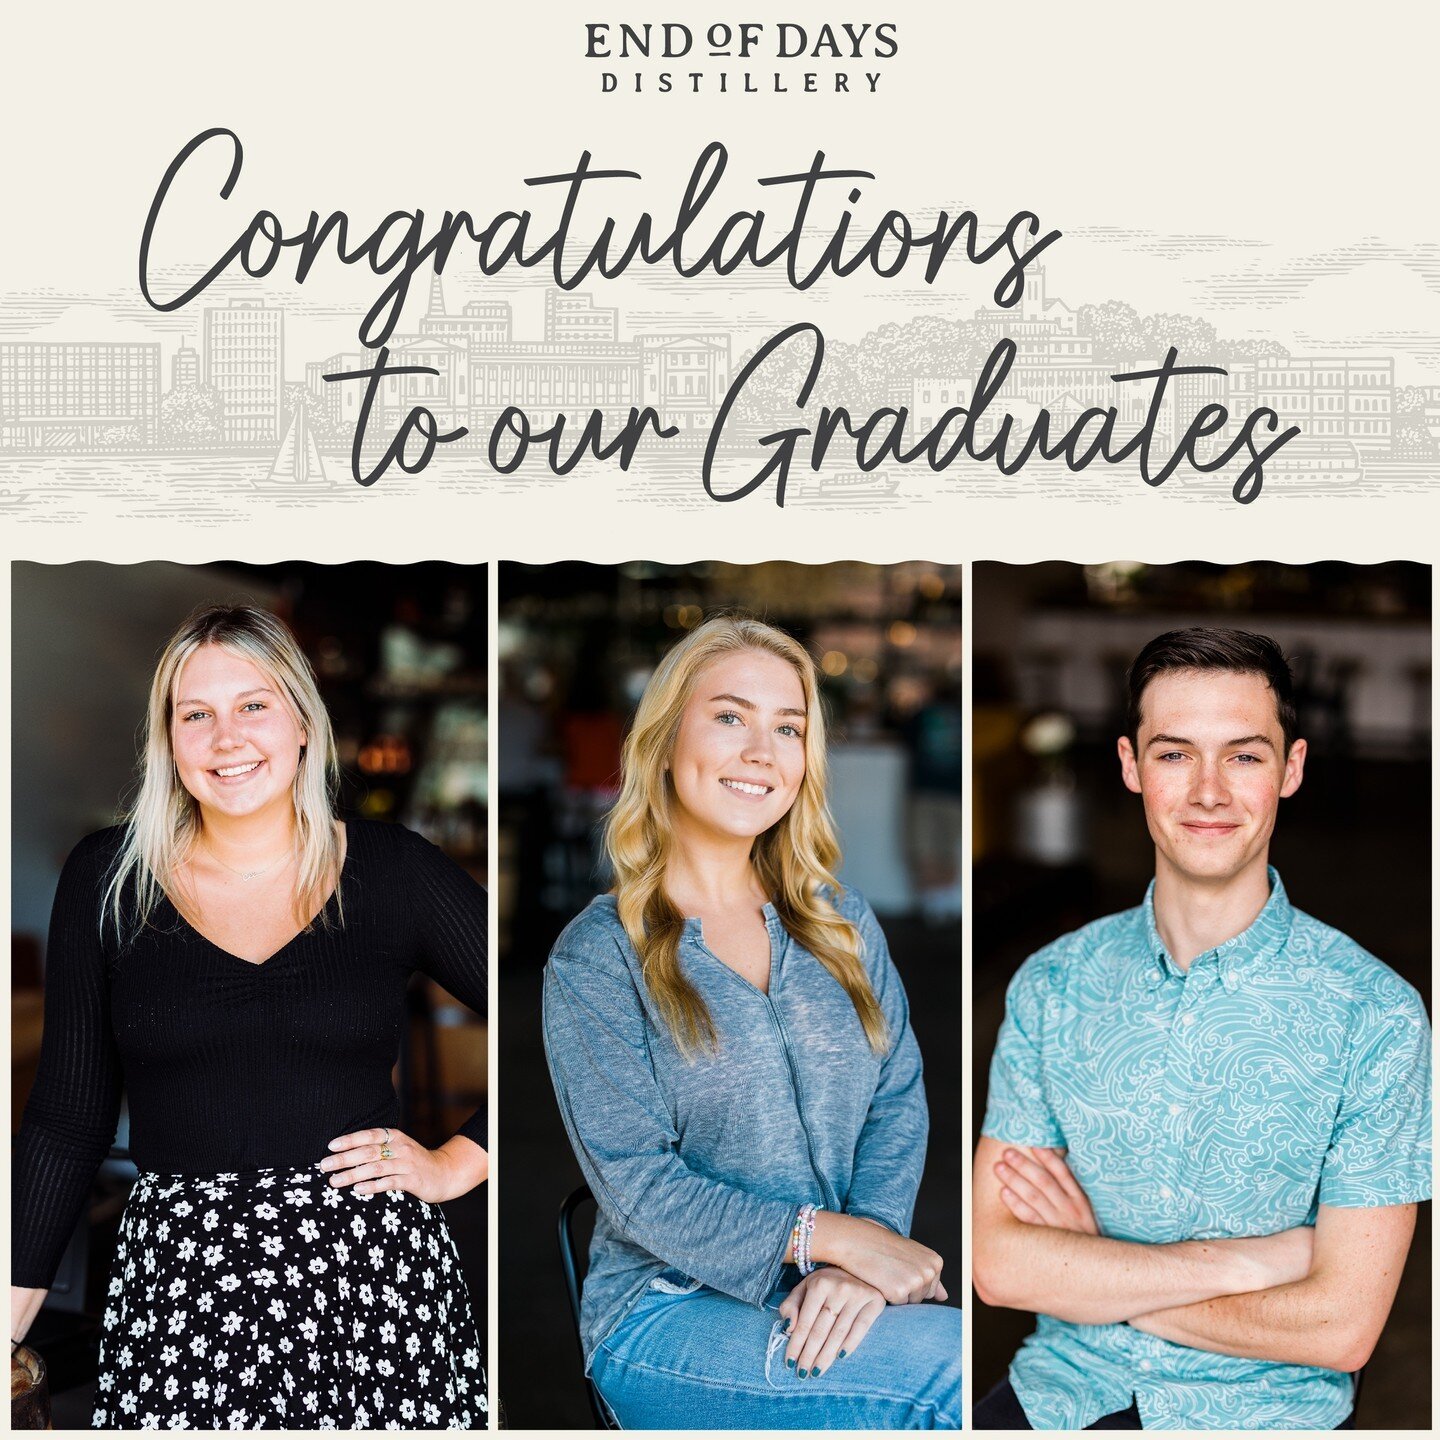 We love getting to brag about our team. Today we want to give a huge shout-out to Tyler Hollowell, Chloe Childers, and Evan Faulkner. @eod_tyler is graduating from @uncwilmington with a Marketing Degree with a concentration in marketing strategy. Chl